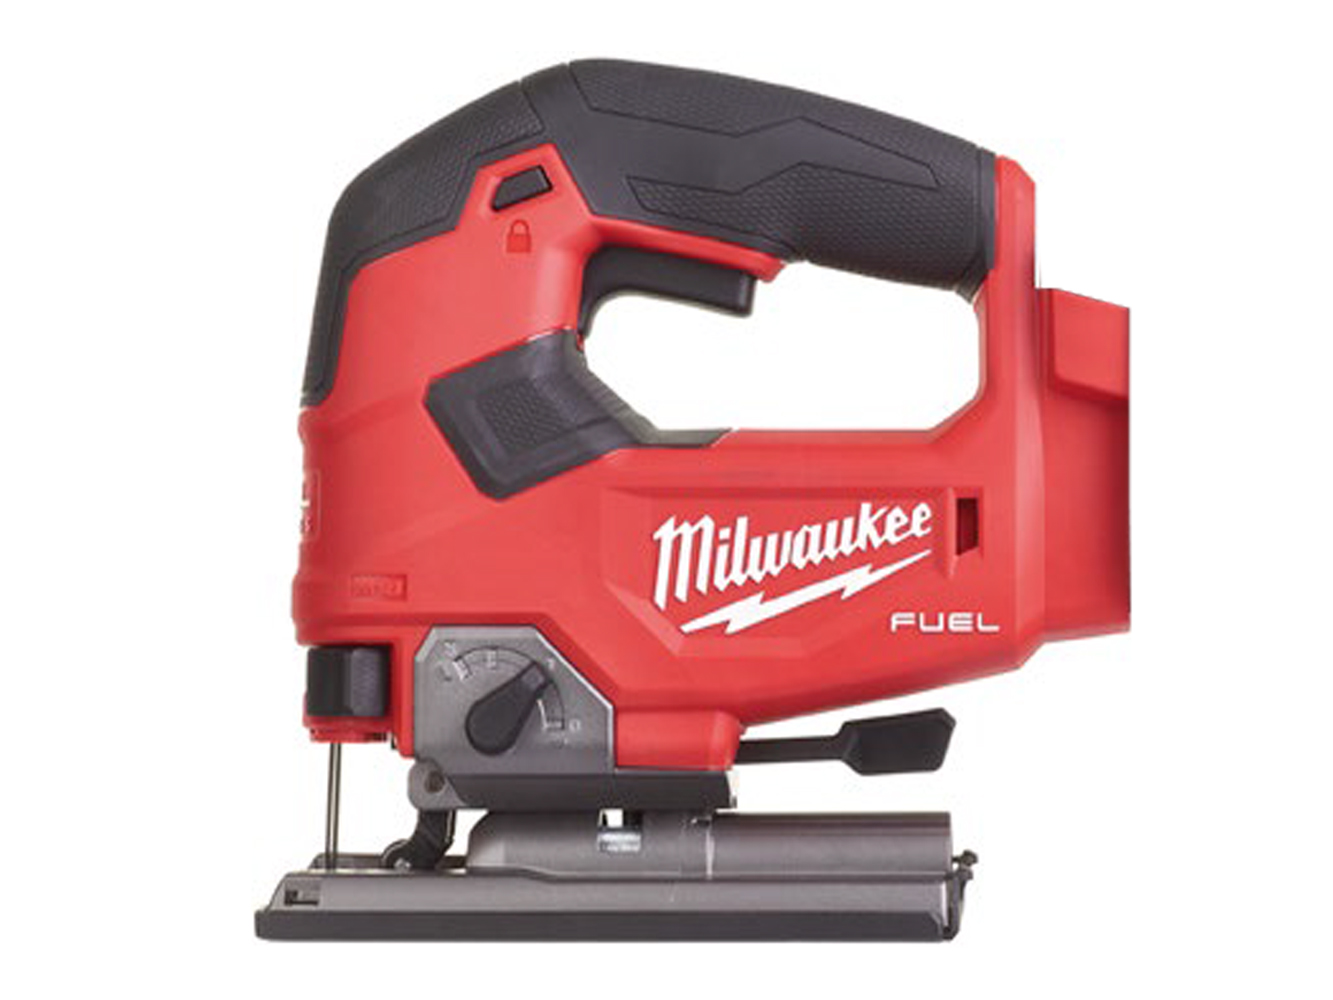 Milwaukee M18FJS 18V Fuel Jigsaw With Top-Handle and 5 Stage Pendulum Action - Body Only